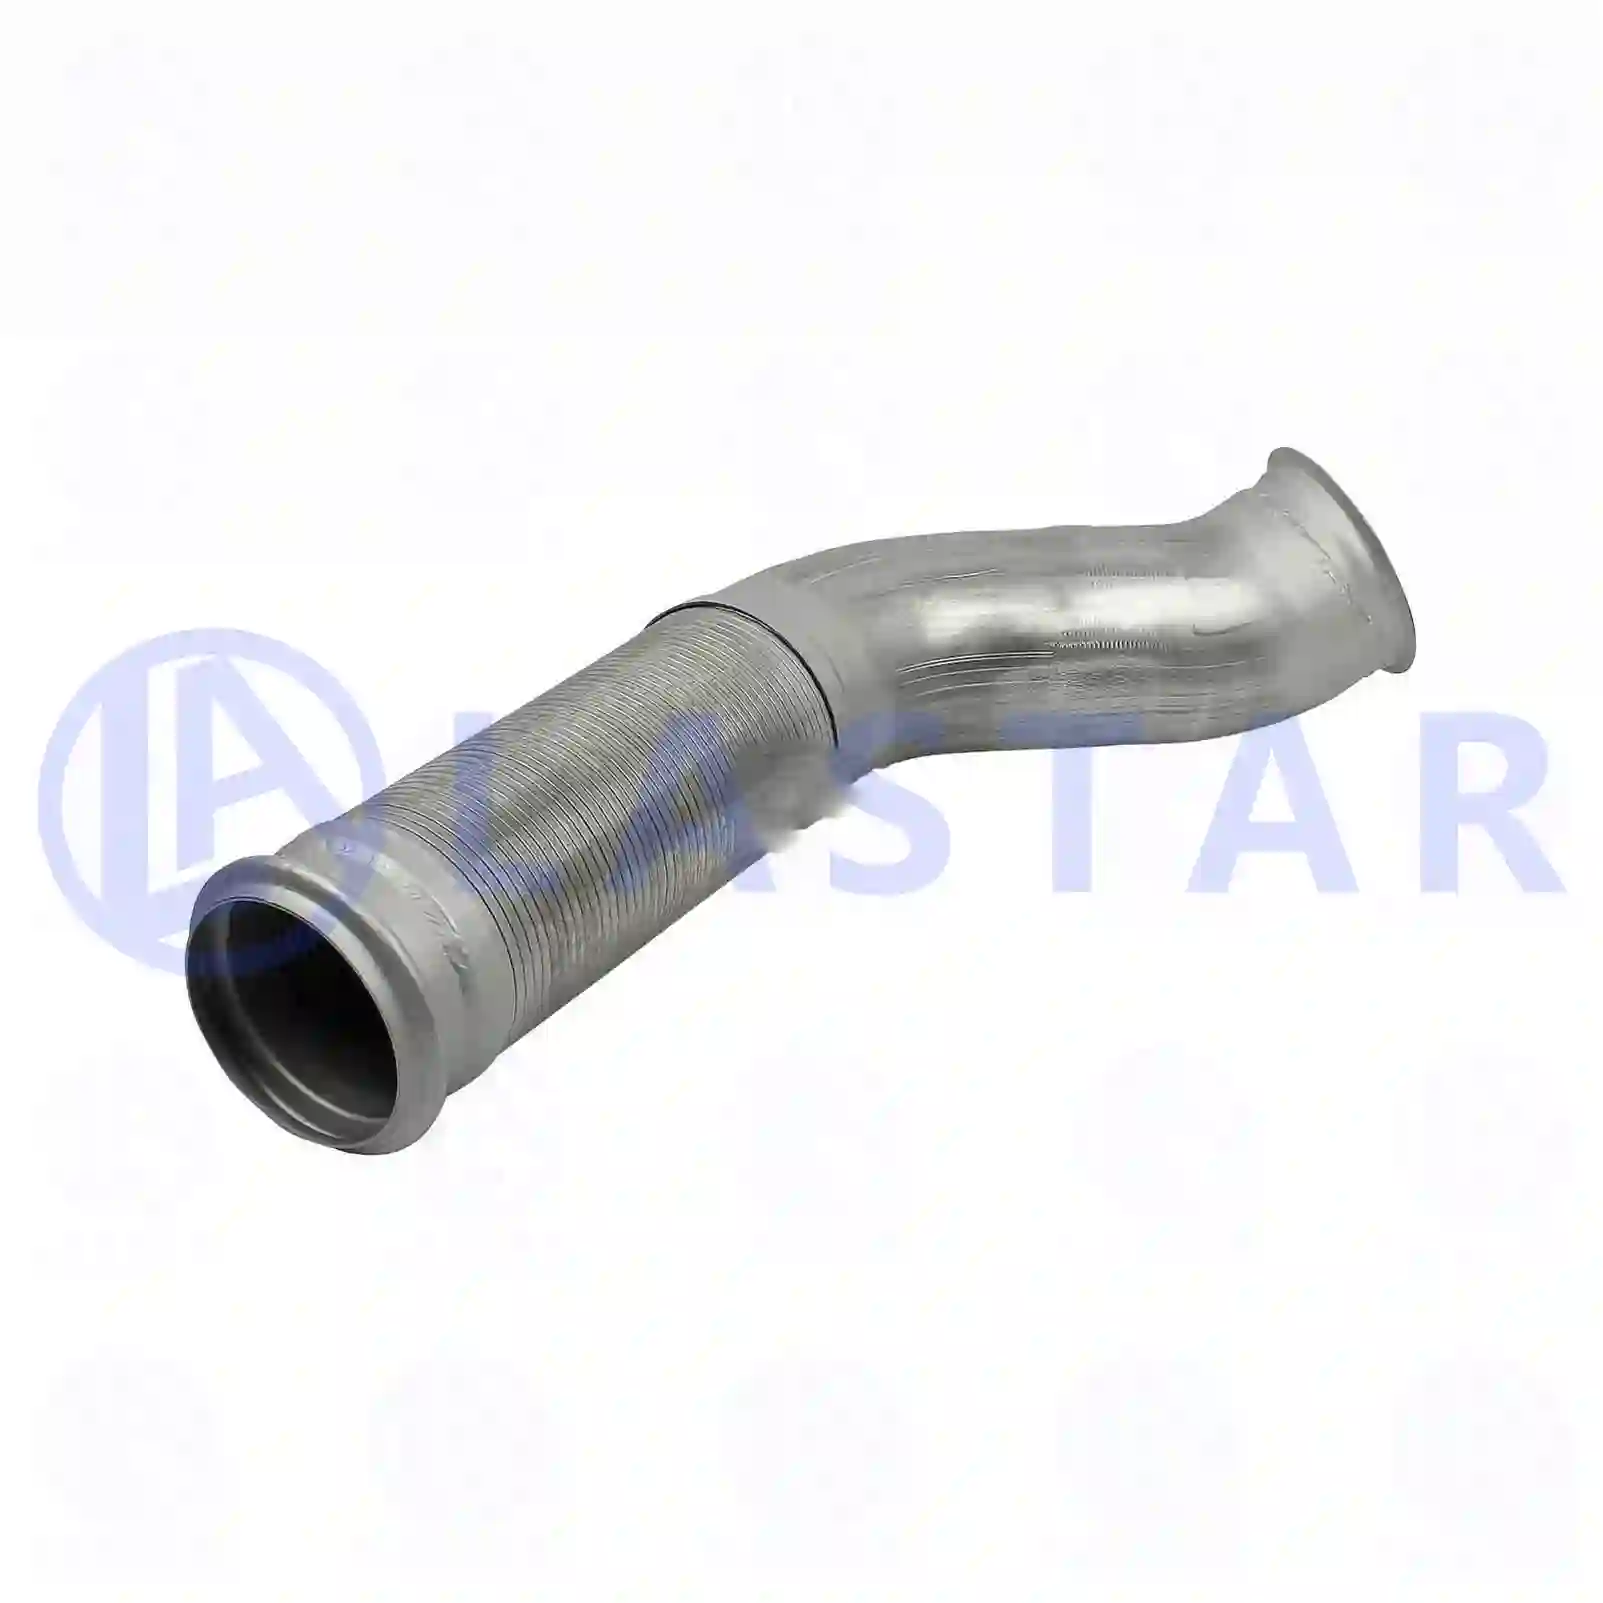 Exhaust pipe, 77706899, 7421718681, 7422321903, 21718681, 22321903, ZG10298-0008 ||  77706899 Lastar Spare Part | Truck Spare Parts, Auotomotive Spare Parts Exhaust pipe, 77706899, 7421718681, 7422321903, 21718681, 22321903, ZG10298-0008 ||  77706899 Lastar Spare Part | Truck Spare Parts, Auotomotive Spare Parts